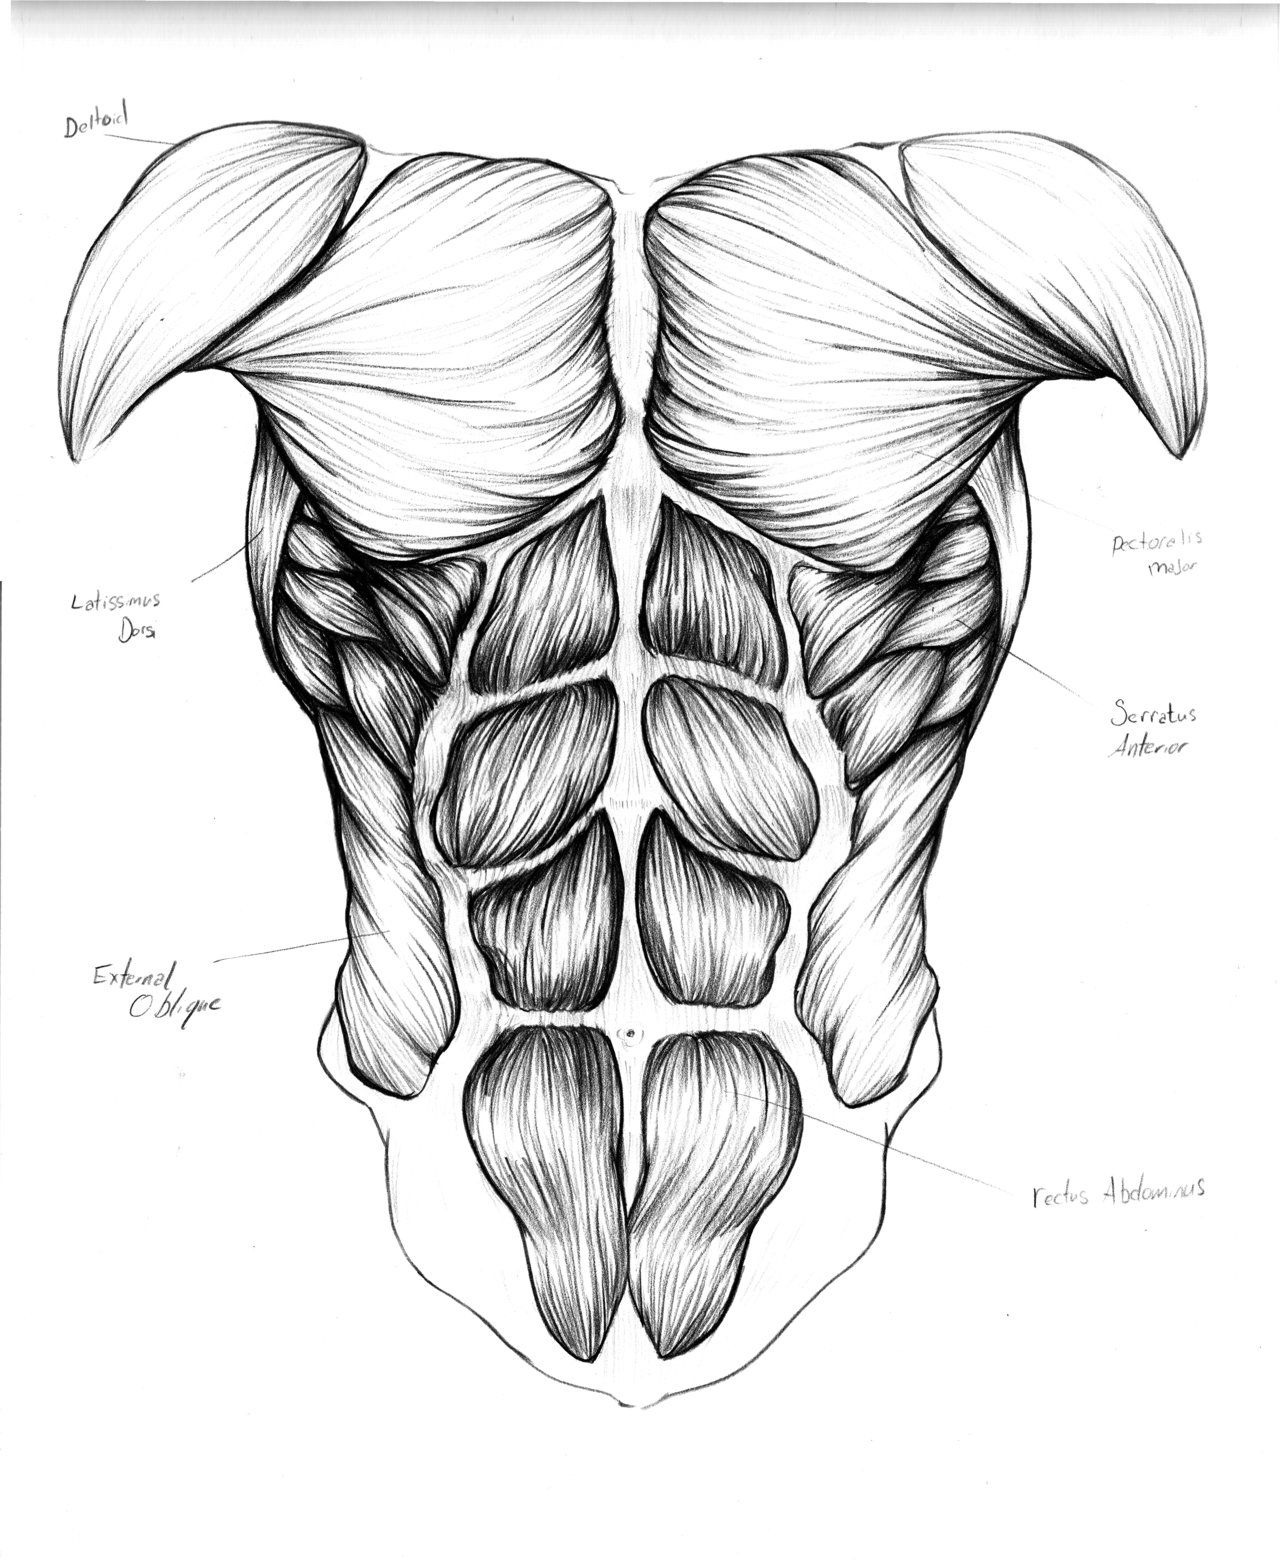 Muscles of the Trunk by OuchIllustrates | My ART Inspiration ...